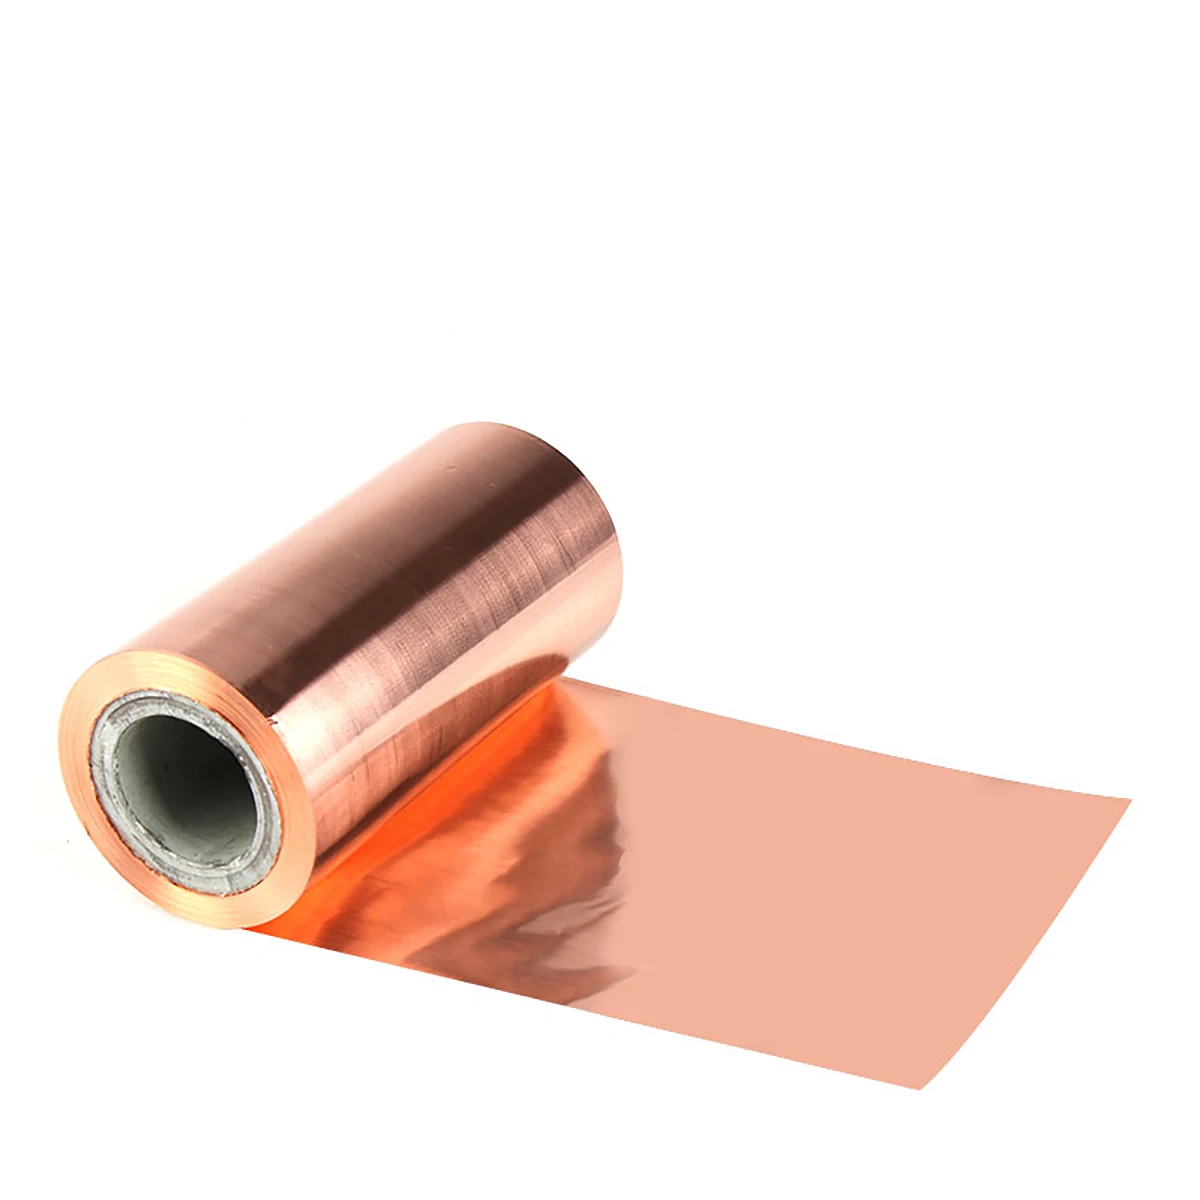 

1 Meter 99.99% Pure Copper Foil Strip High Purity T2 Red Copper Shielded Sheet Roll Thickness 0.03/0.05/0.08/0.1/0.15 to 0.5mm